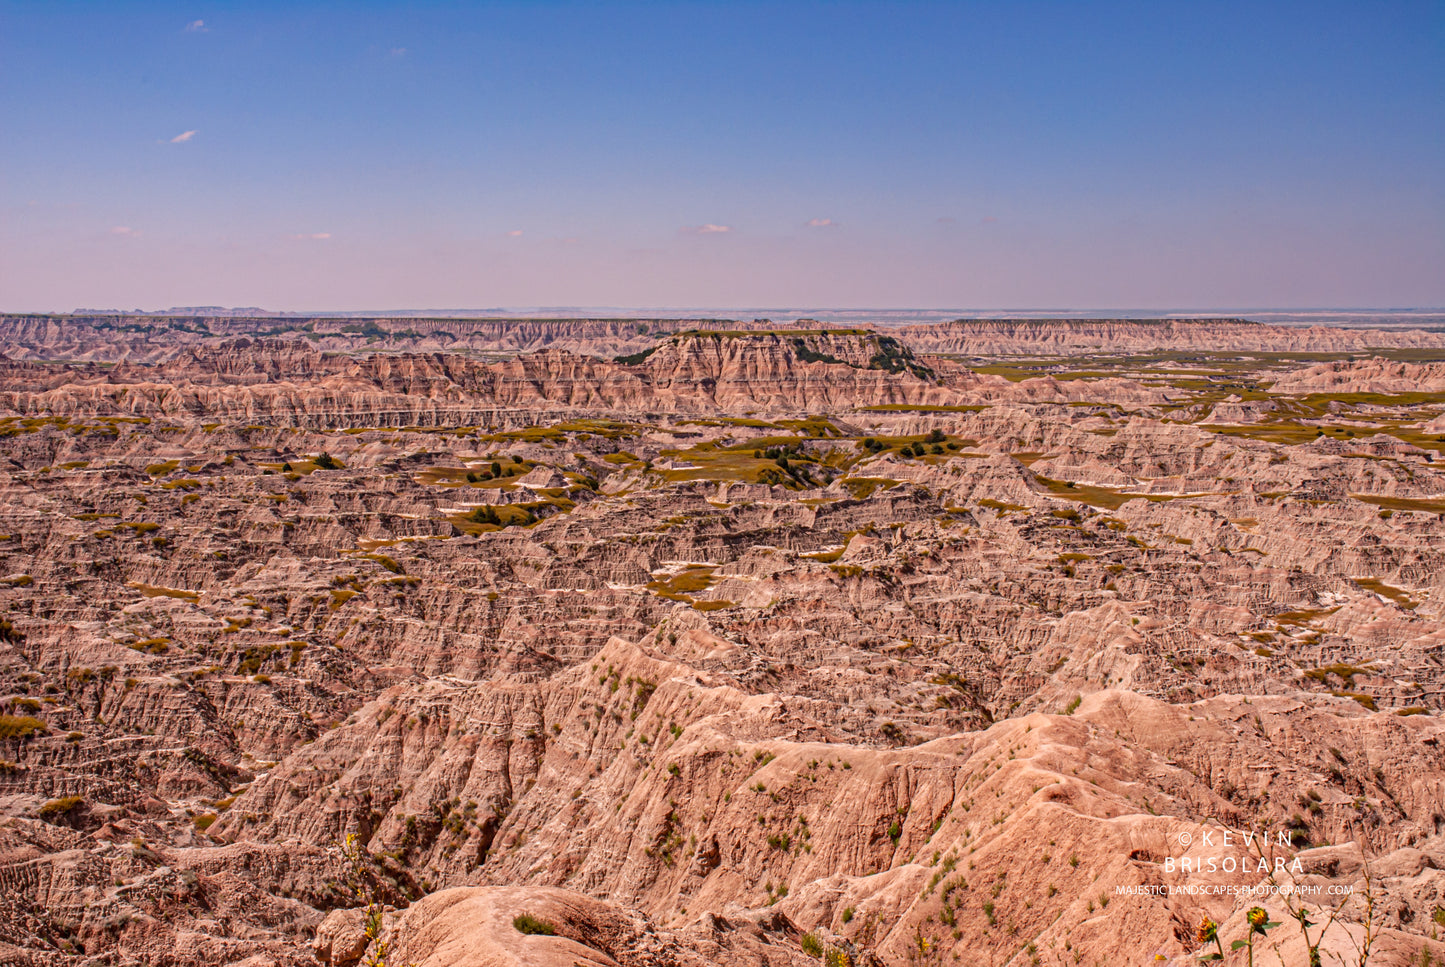 MAJESTIC BUTTES AND SPIRES OF THE PARK